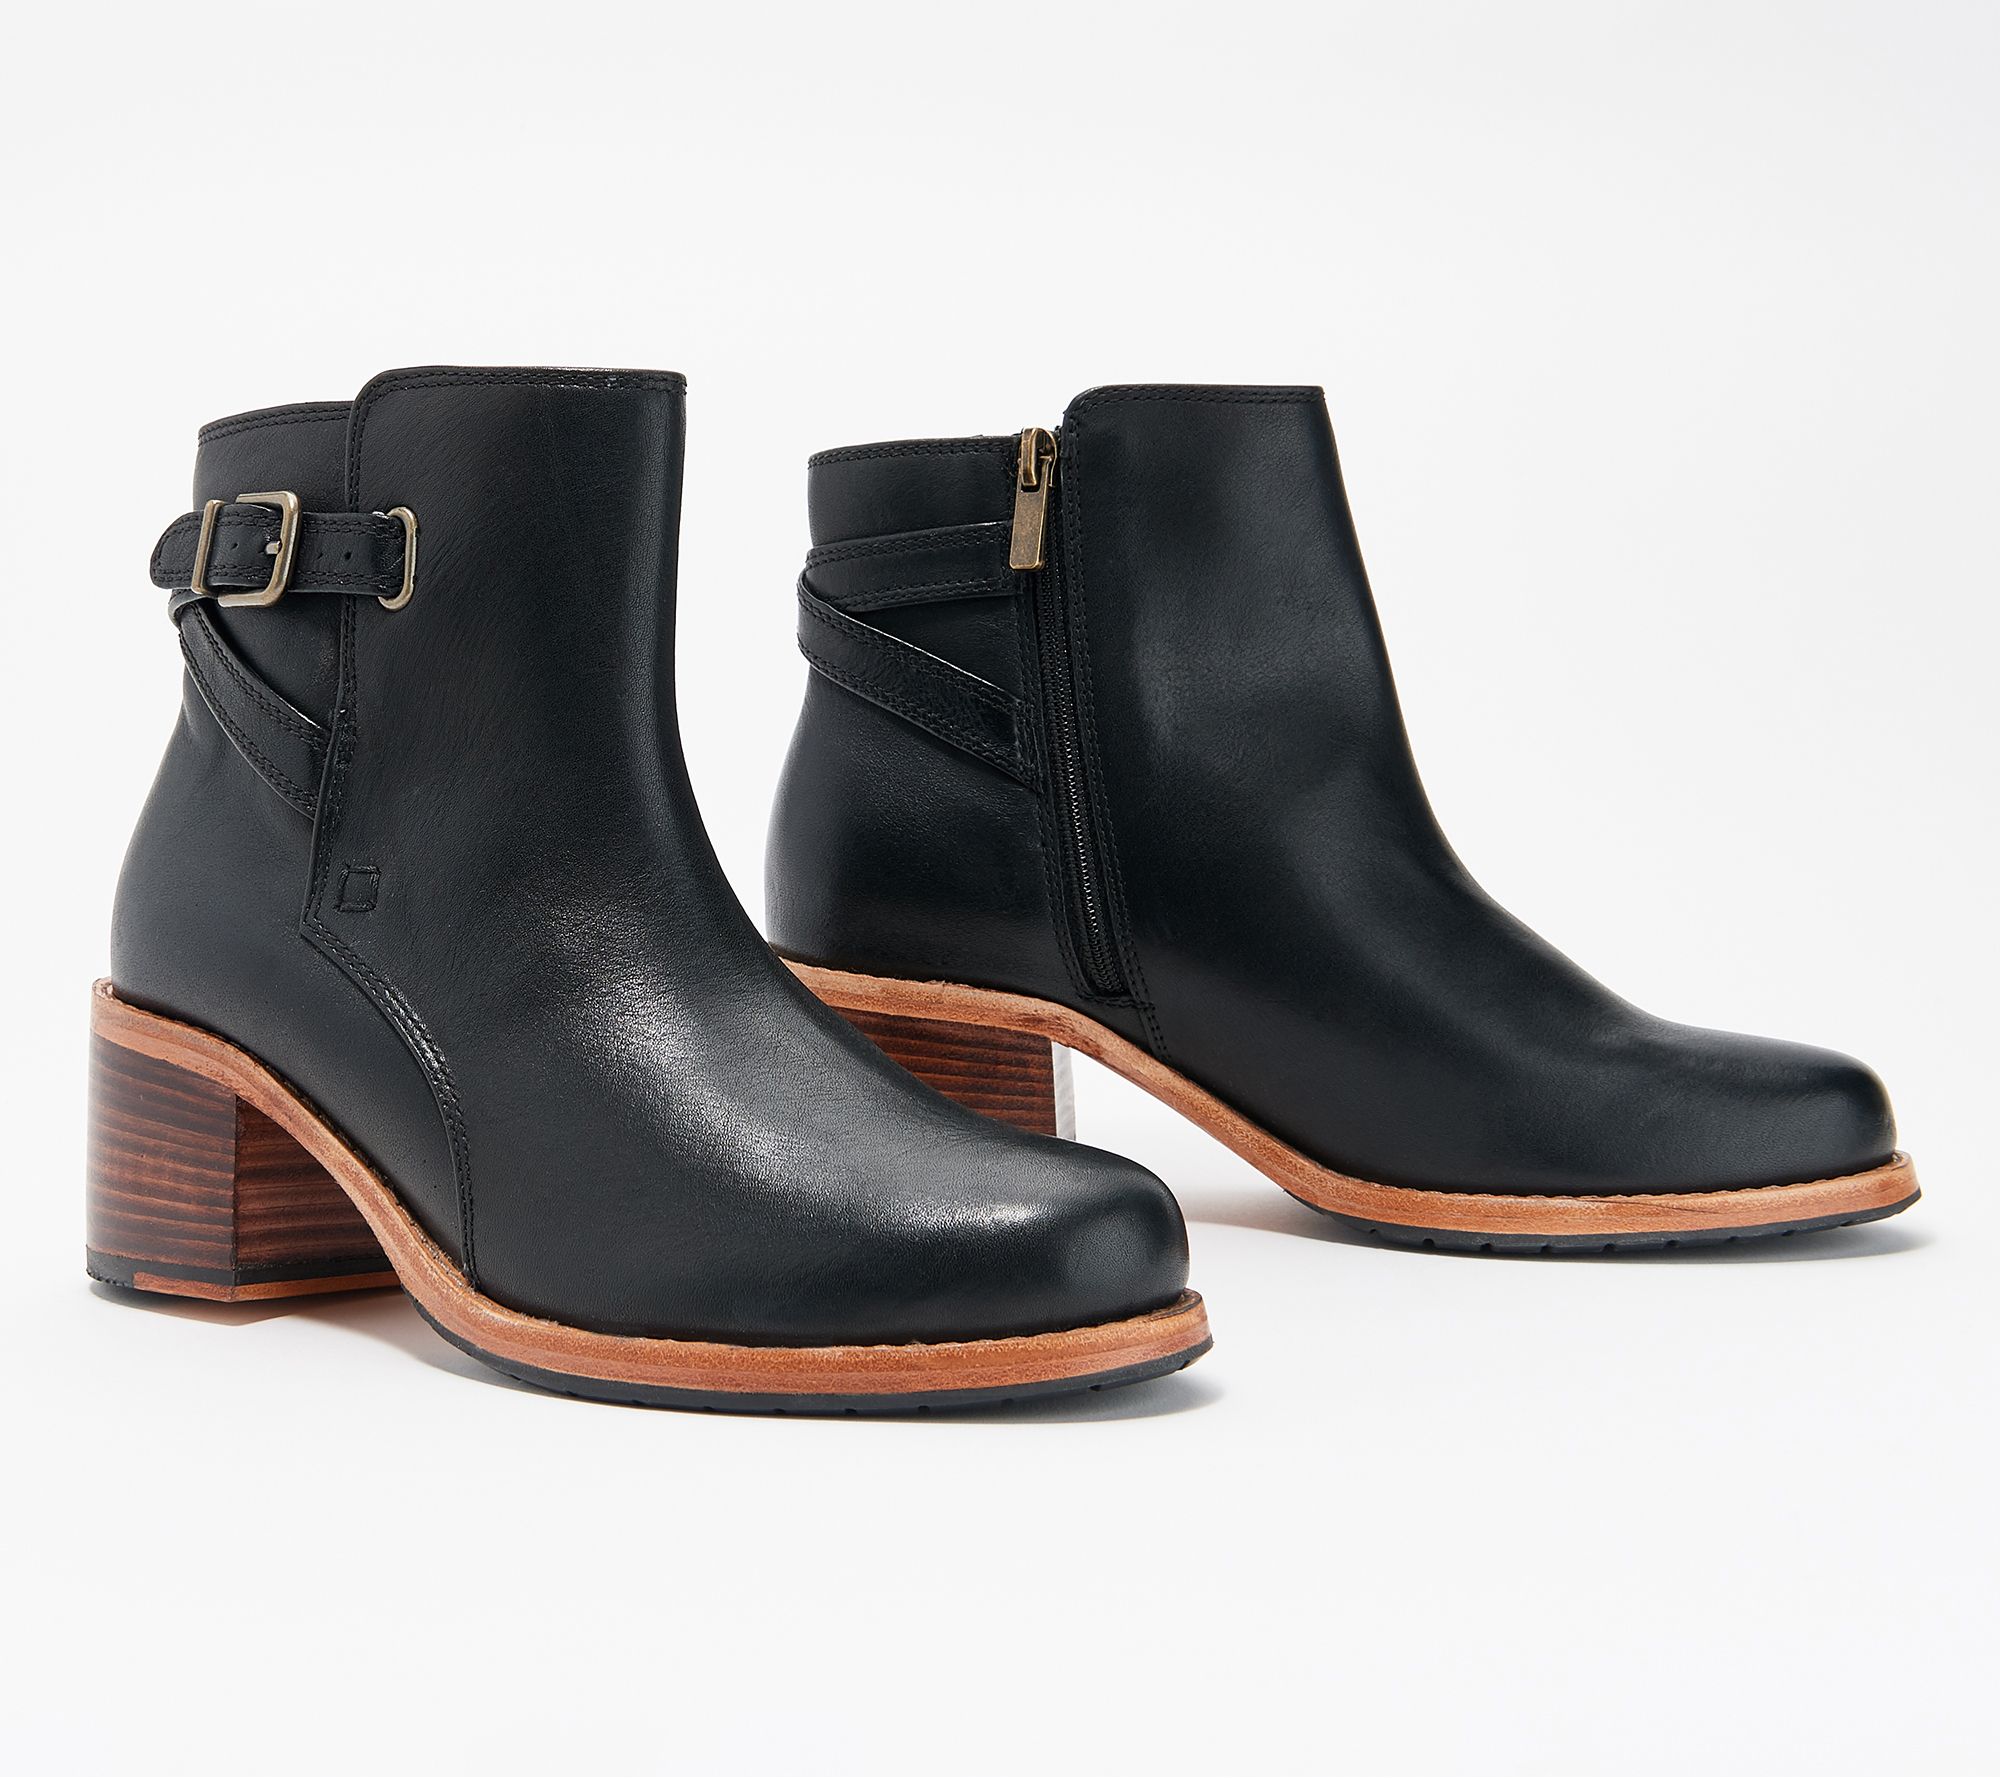 Clarks Leather Ankle Boots w/ Buckle 